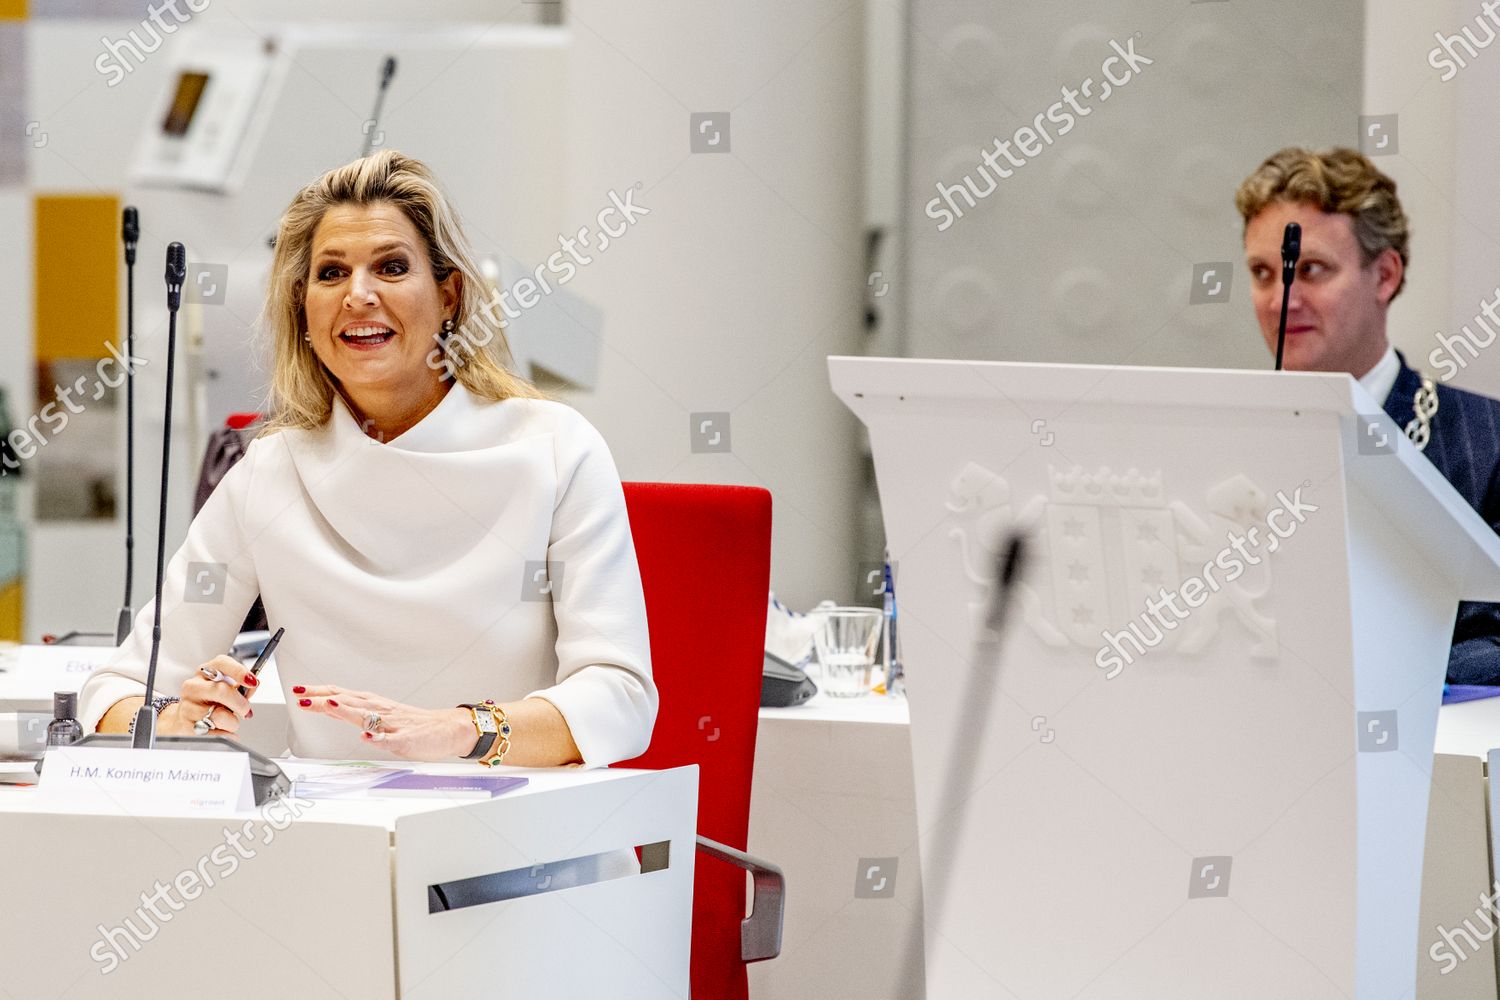 queen-maxima-attends-the-nlgroeit-entrepreneurship-town-hall-of-gouda-the-netherlands-shutterstock-editorial-11089441o.jpg